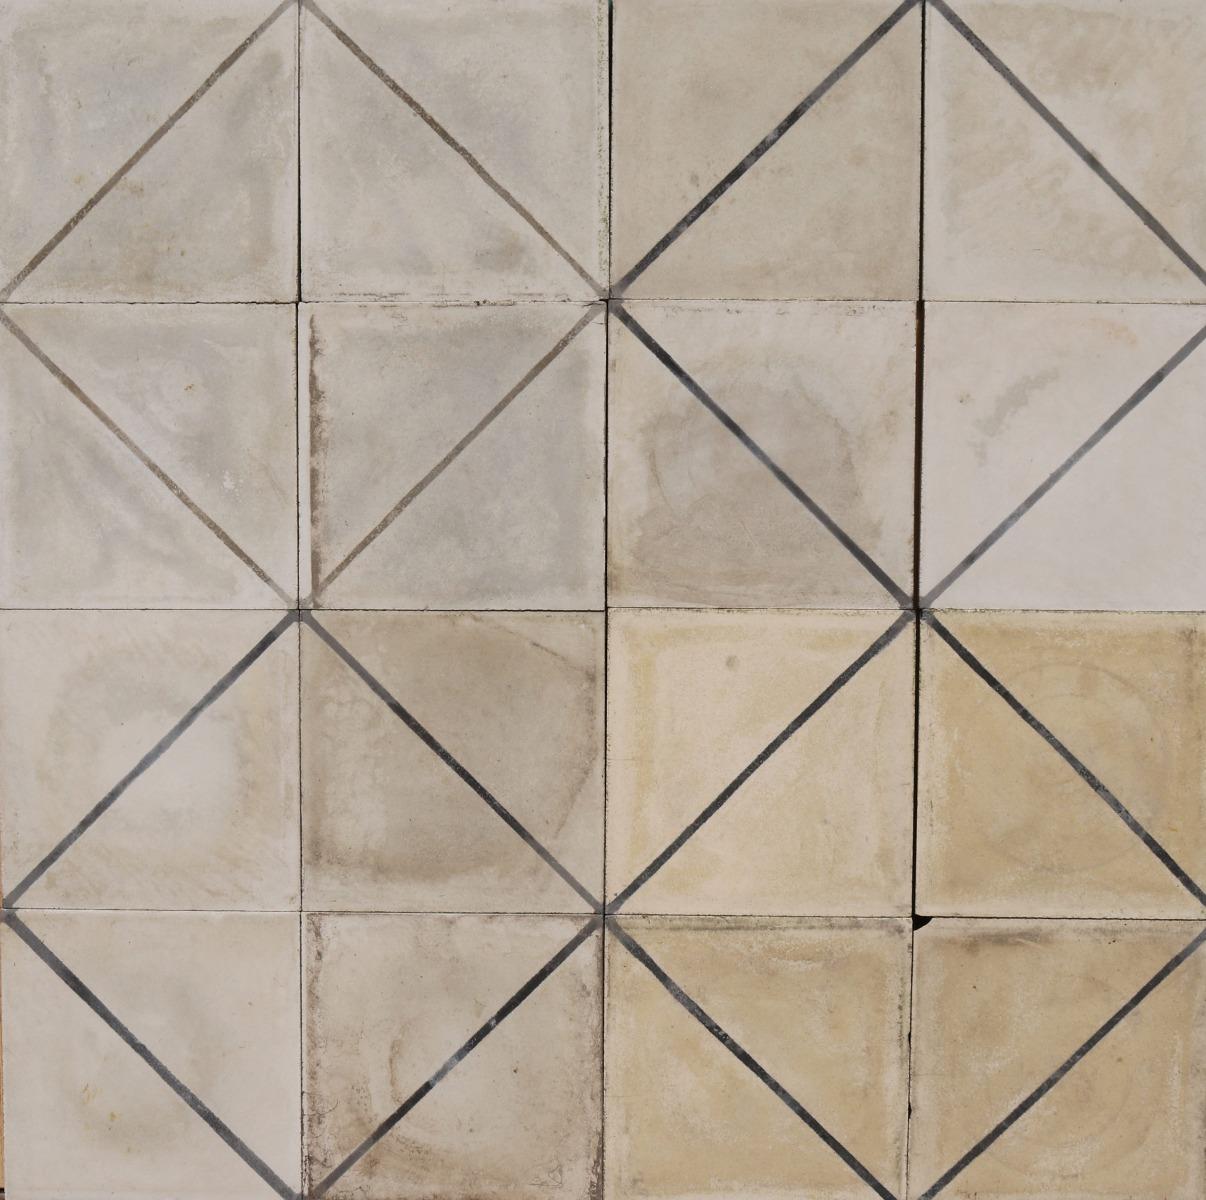 A batch of 76 reclaimed cement patterned floor or wall tiles in three different shades of cream. These tiles will cover 3 m2 or 32 sq ft.

Reclaimed tiles in three shades of cream. Good overall condition. Small chips, losses and surface wear